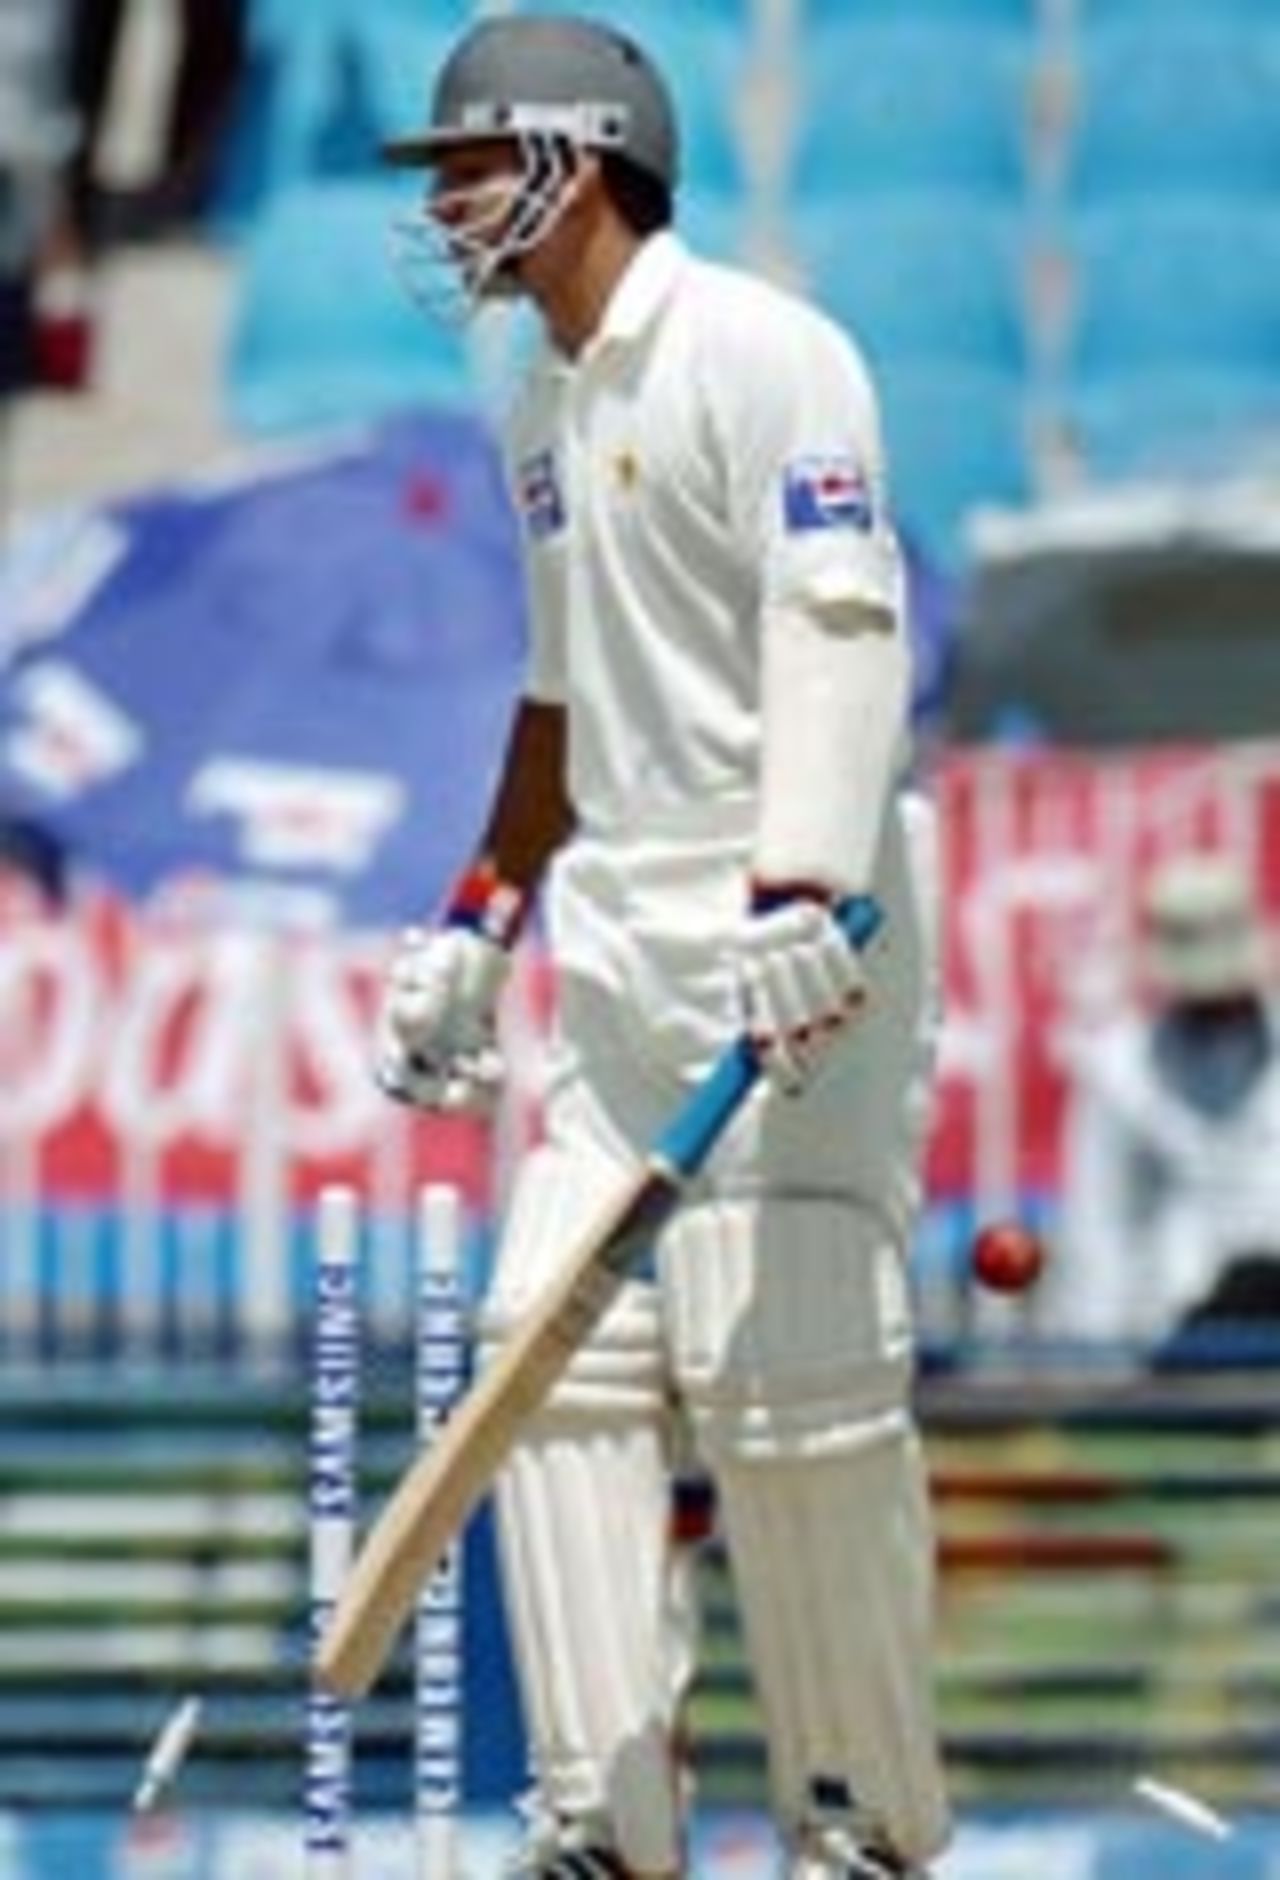 Yousuf Youhana looks back after he is bowled by Irfan Pathan, Pakistan v India, 3rd Test, Rawalpindi, 1st day, April 12, 2004